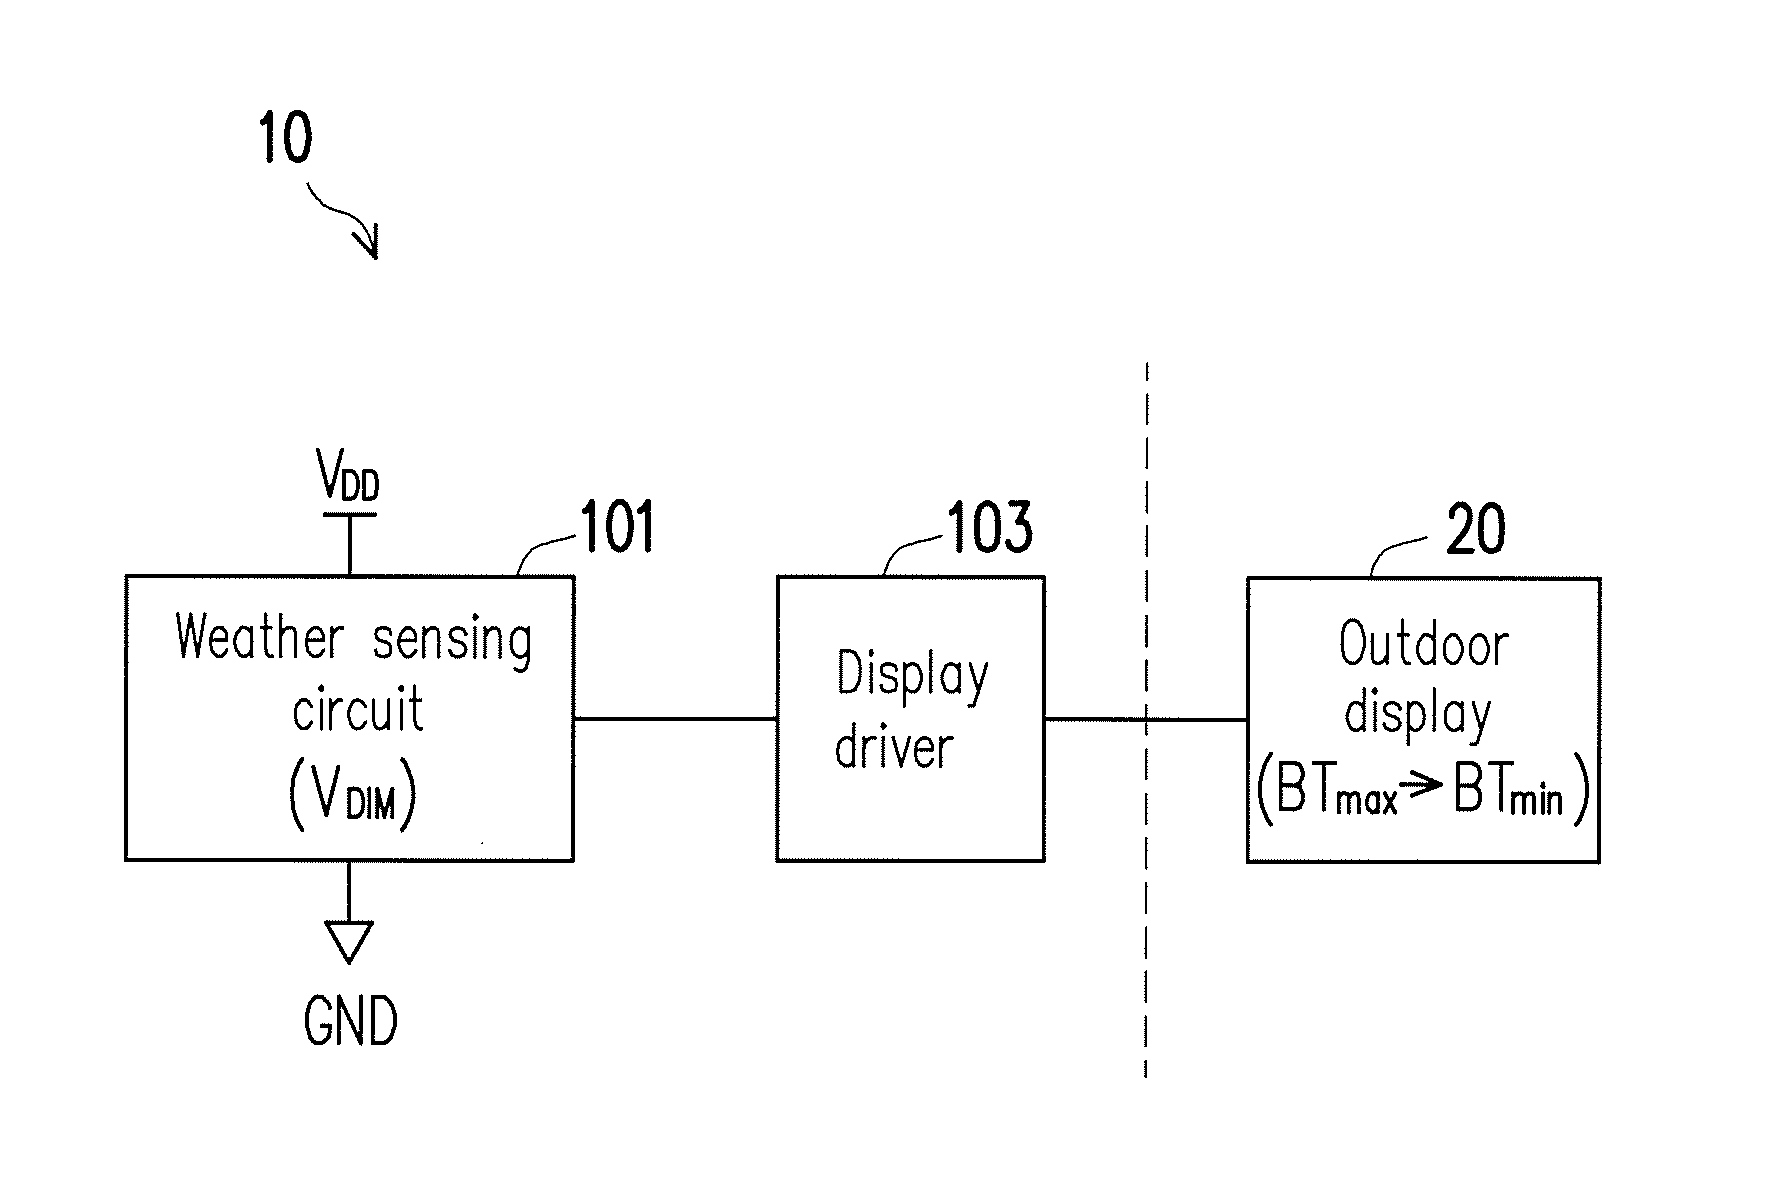 Load driving apparatus adapted to drive outdoor display